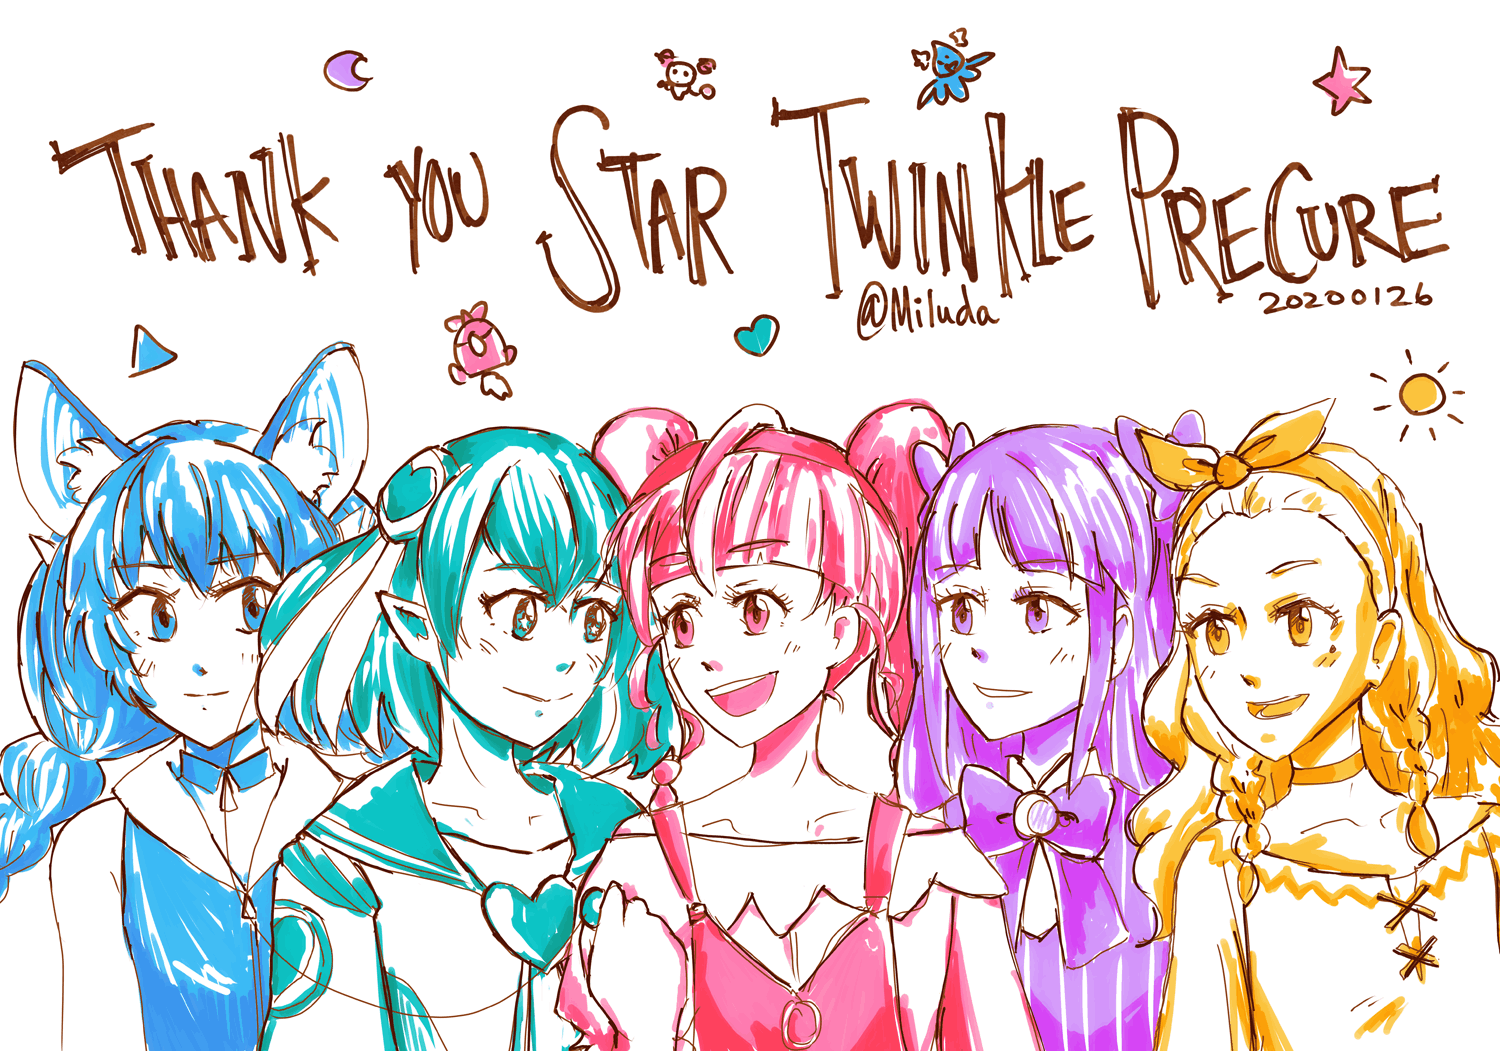 Thank you Star Twinkle